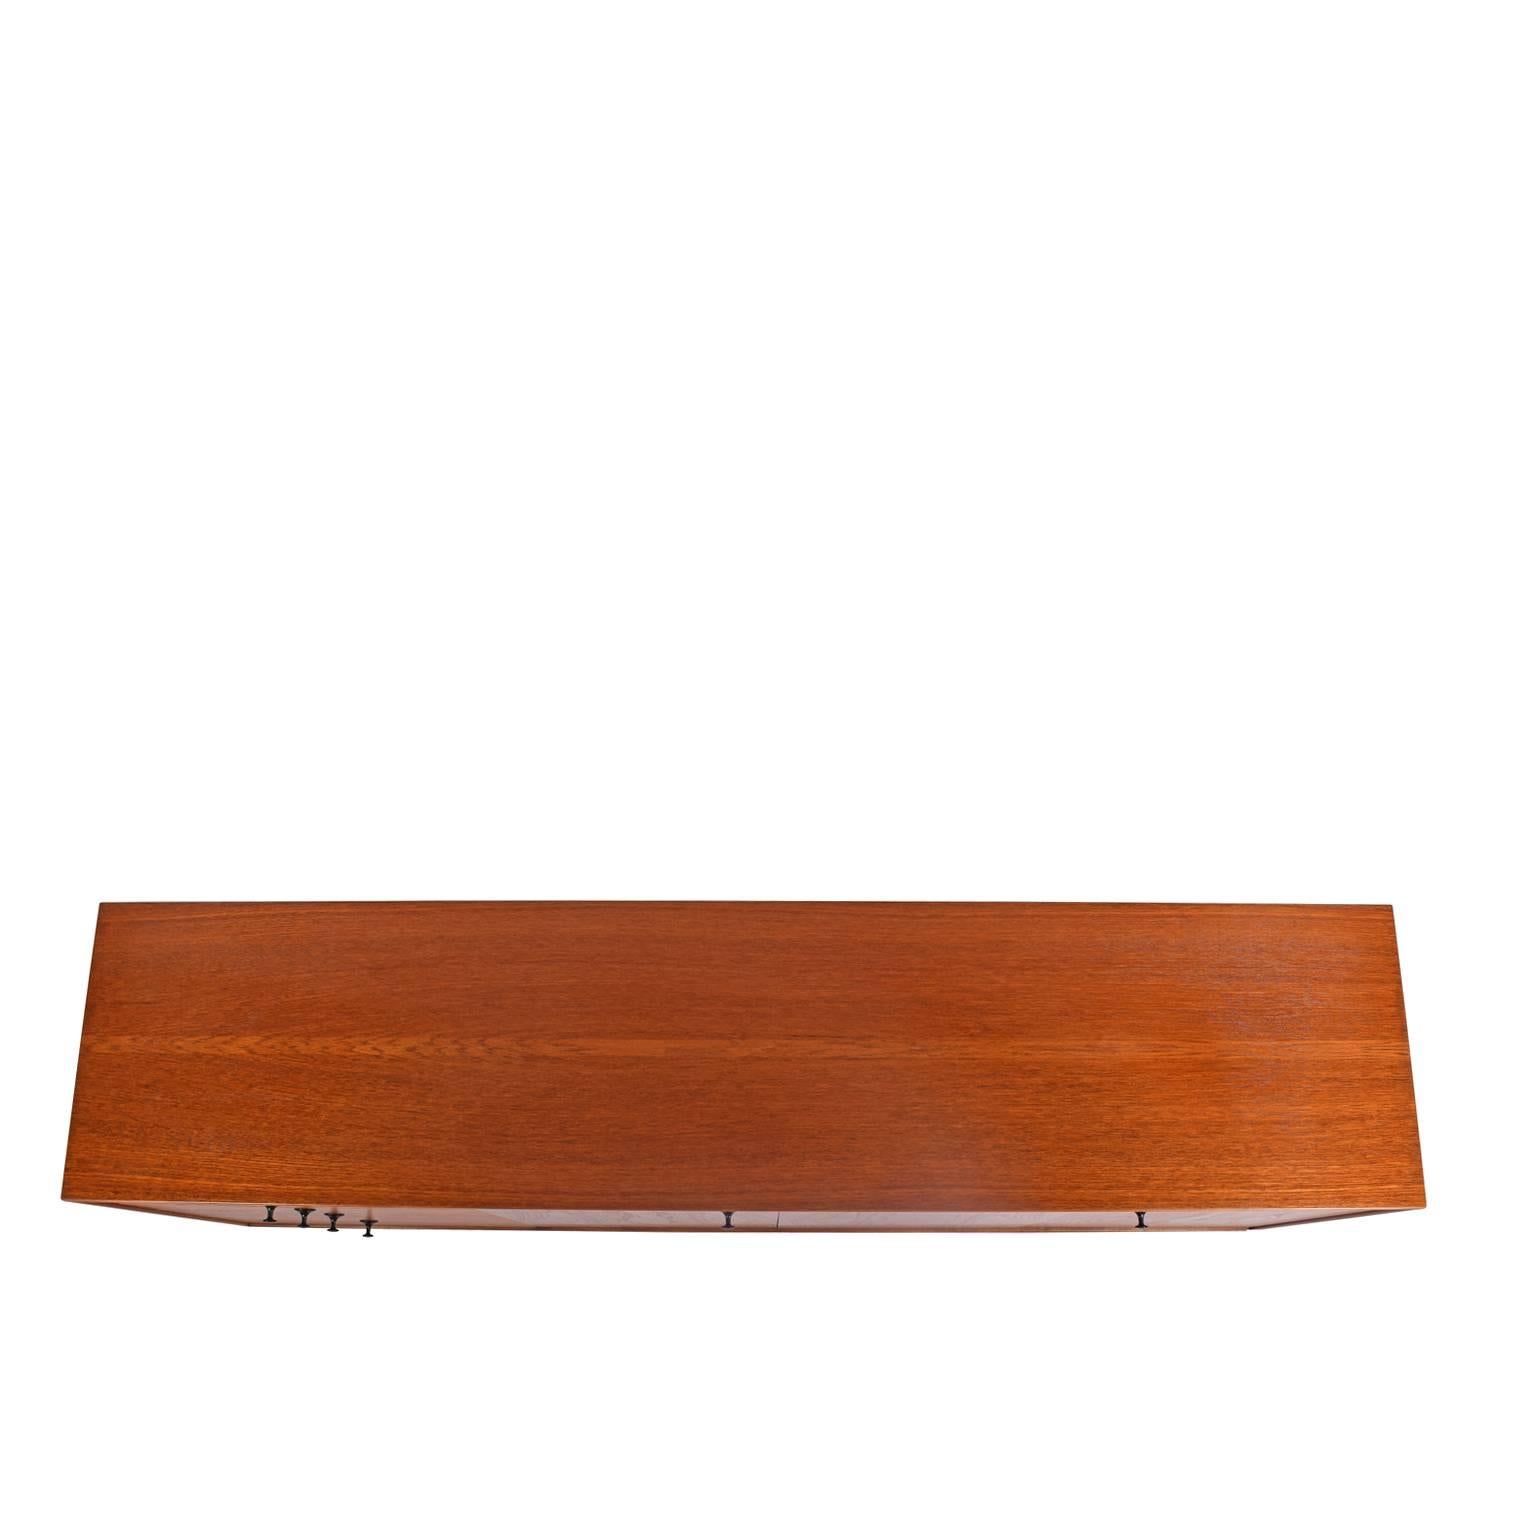 Teak Thin Edge Cabinet by George Nelson and Associates for Herman Miller 1